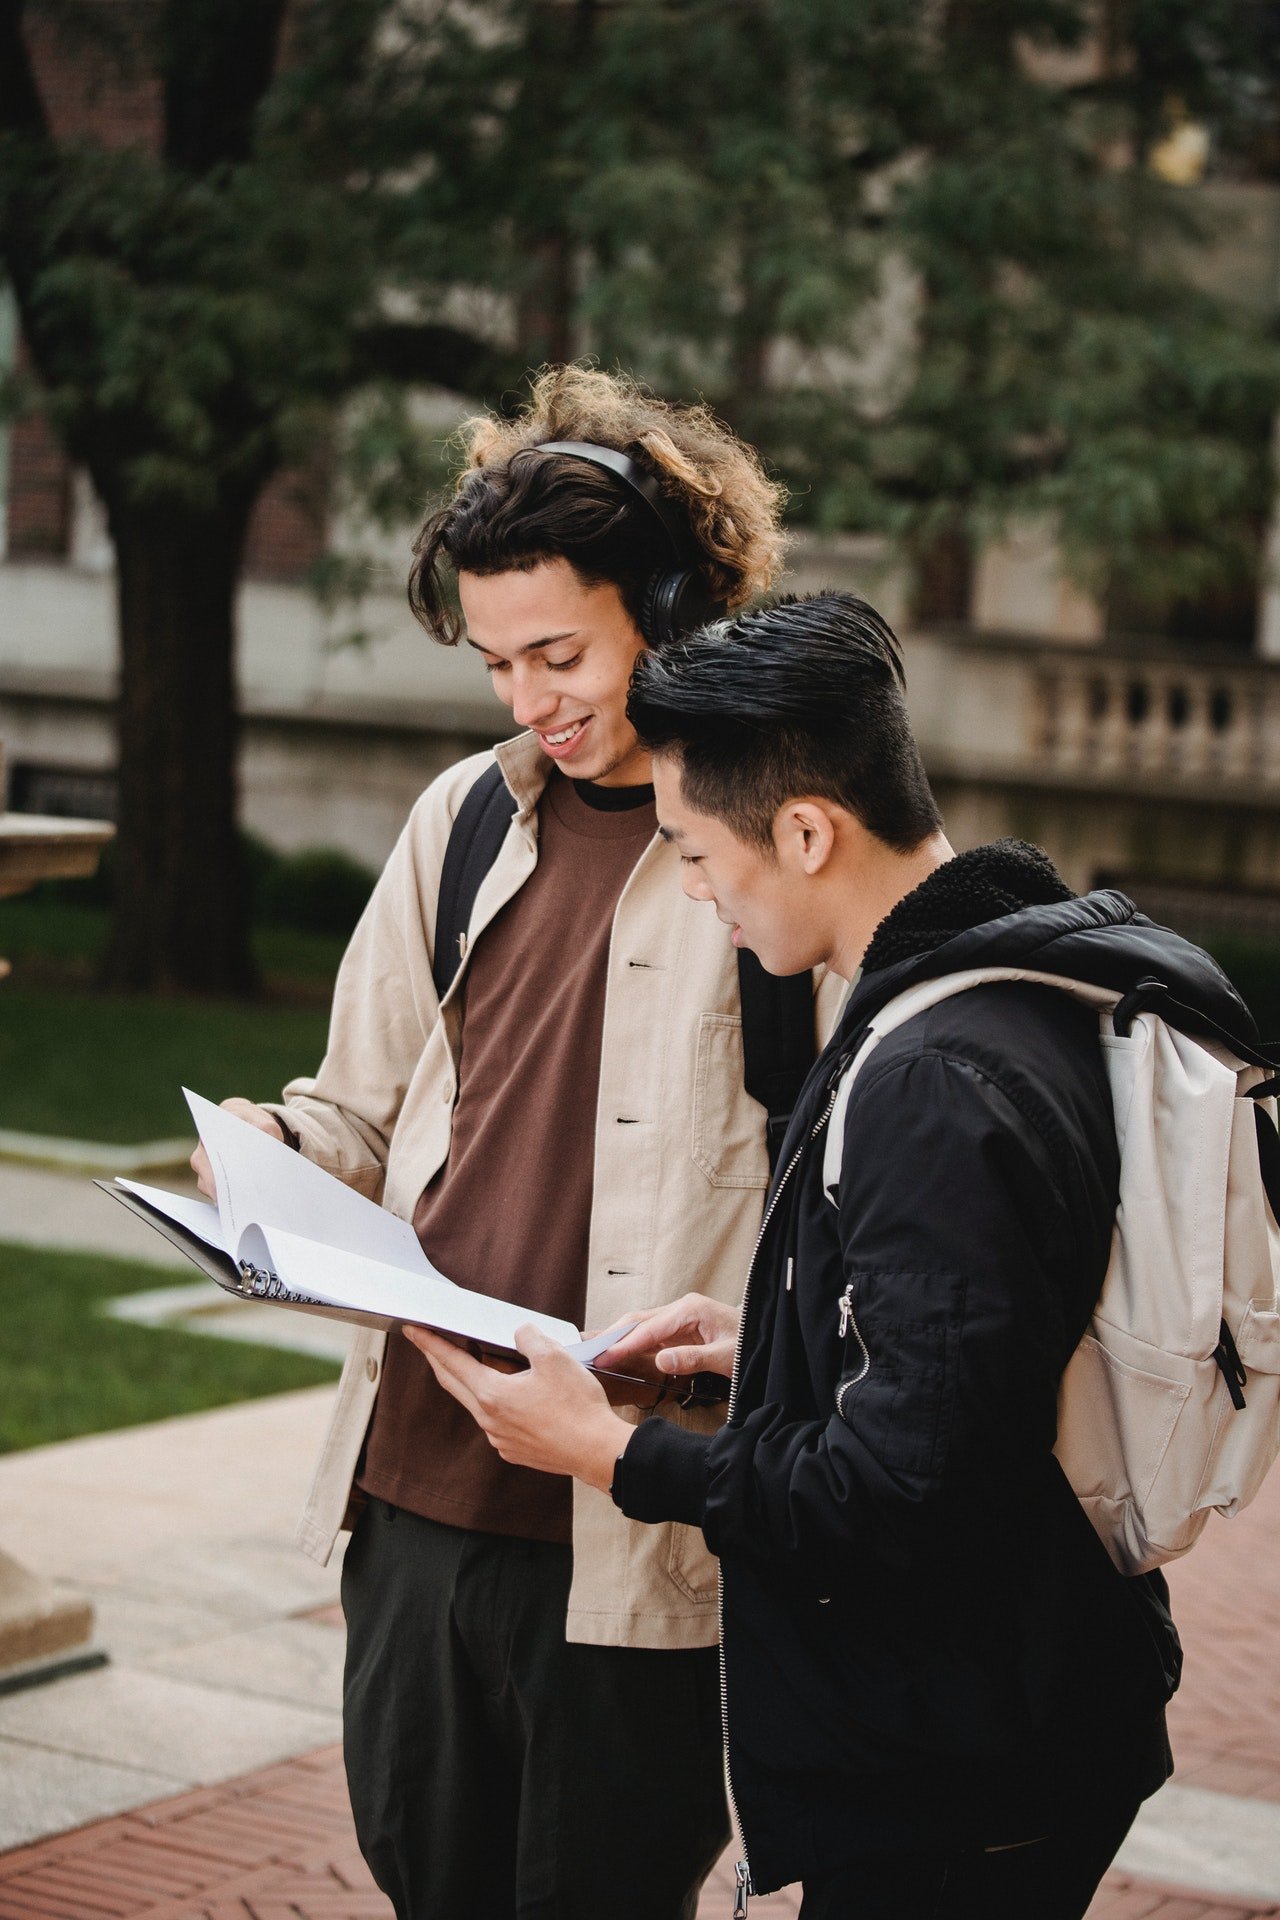 Two students looking at their notebook | Source: Pexels